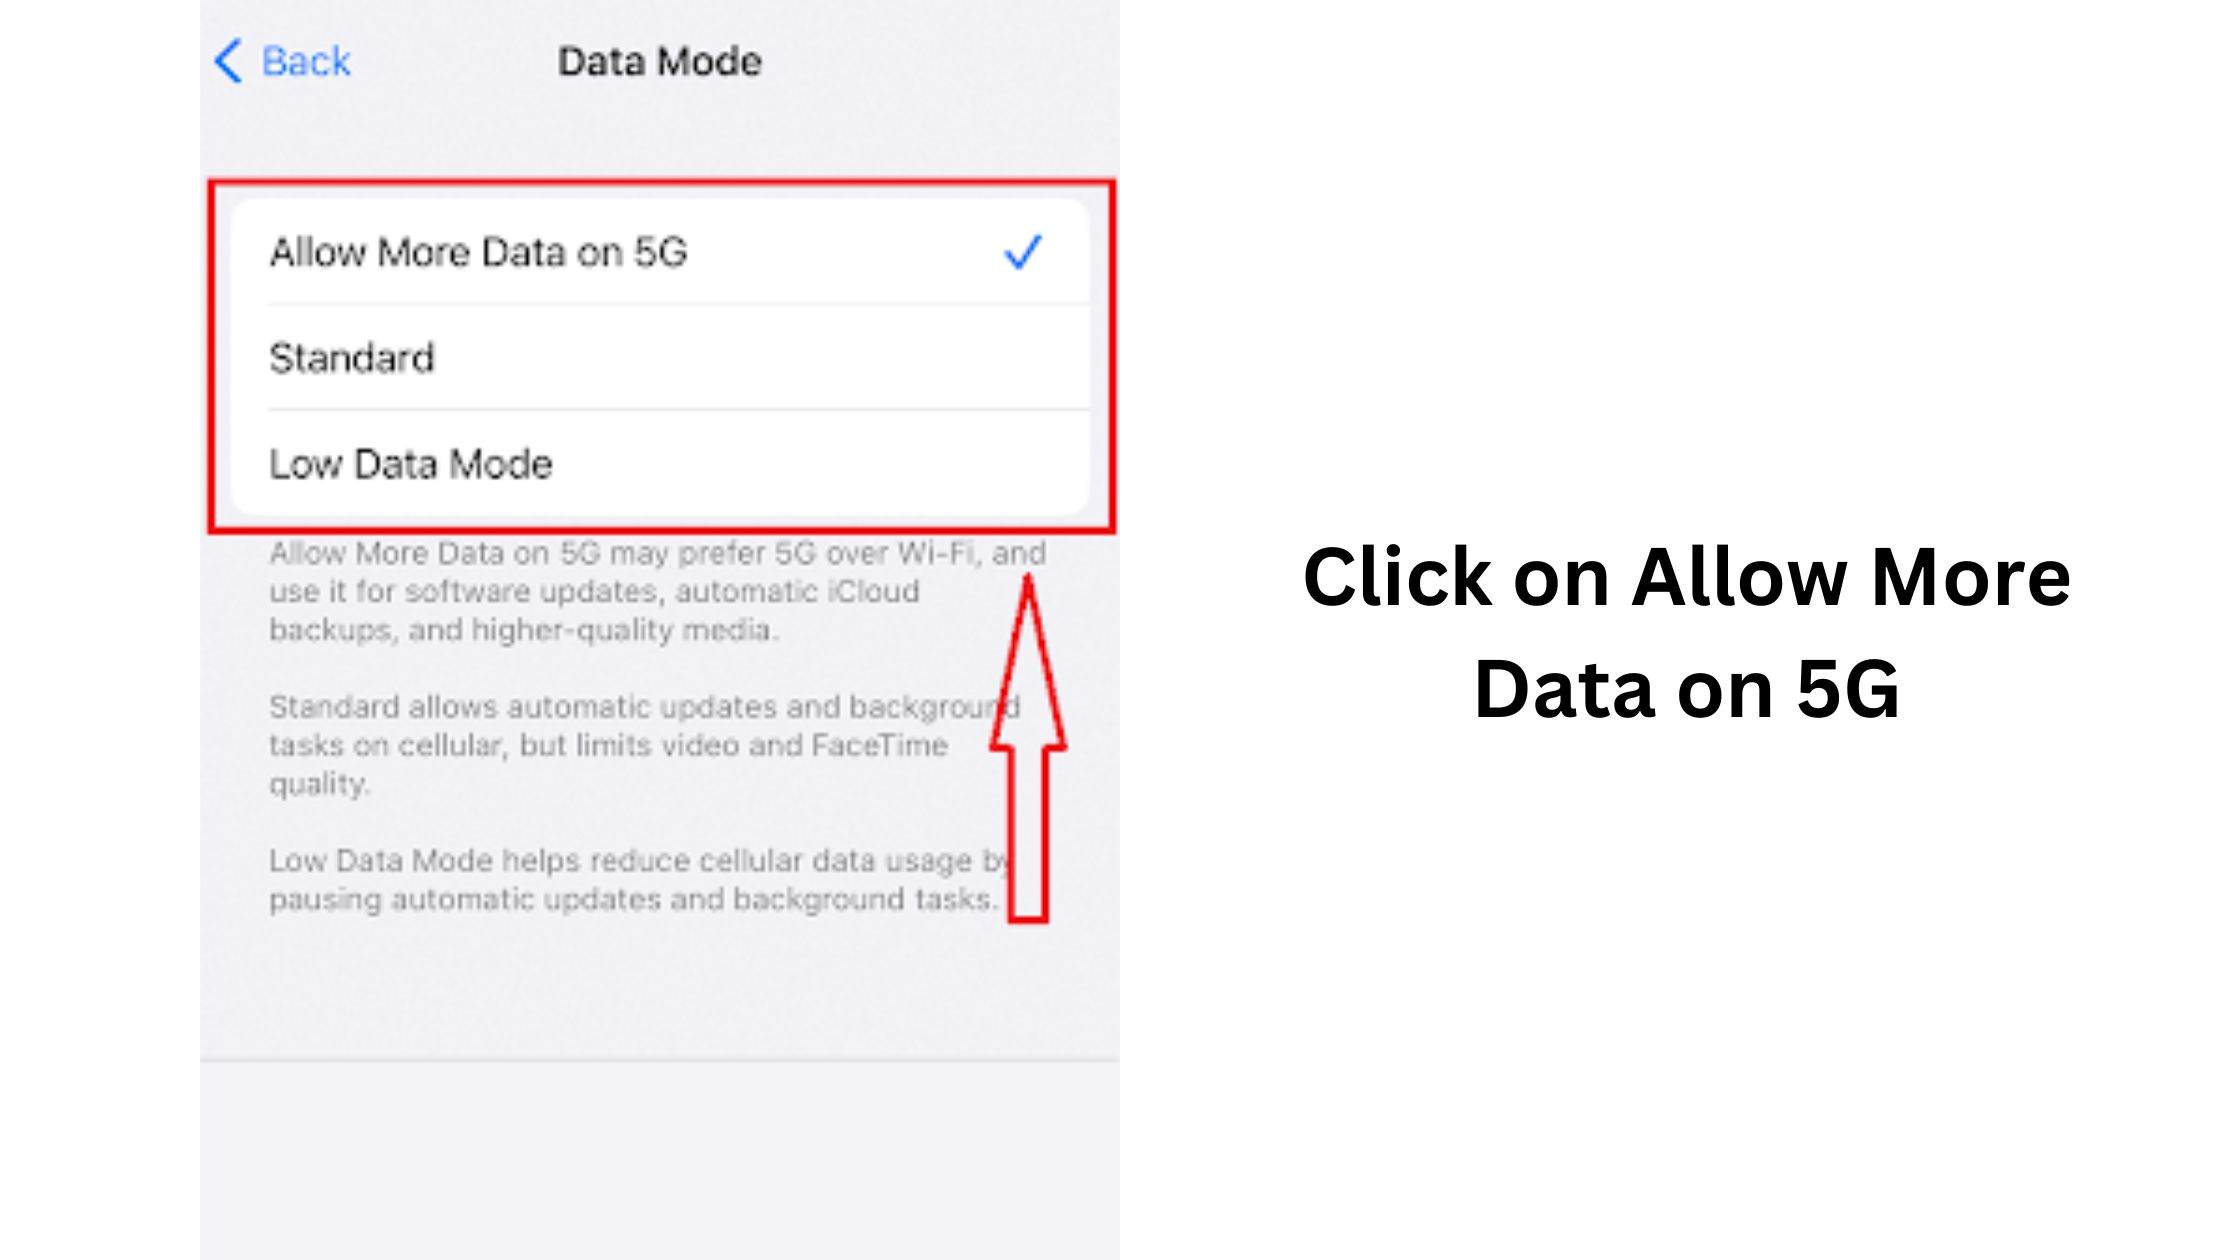 finally click on Allow More Data on 5G for activate Jio 5G network on iPhone